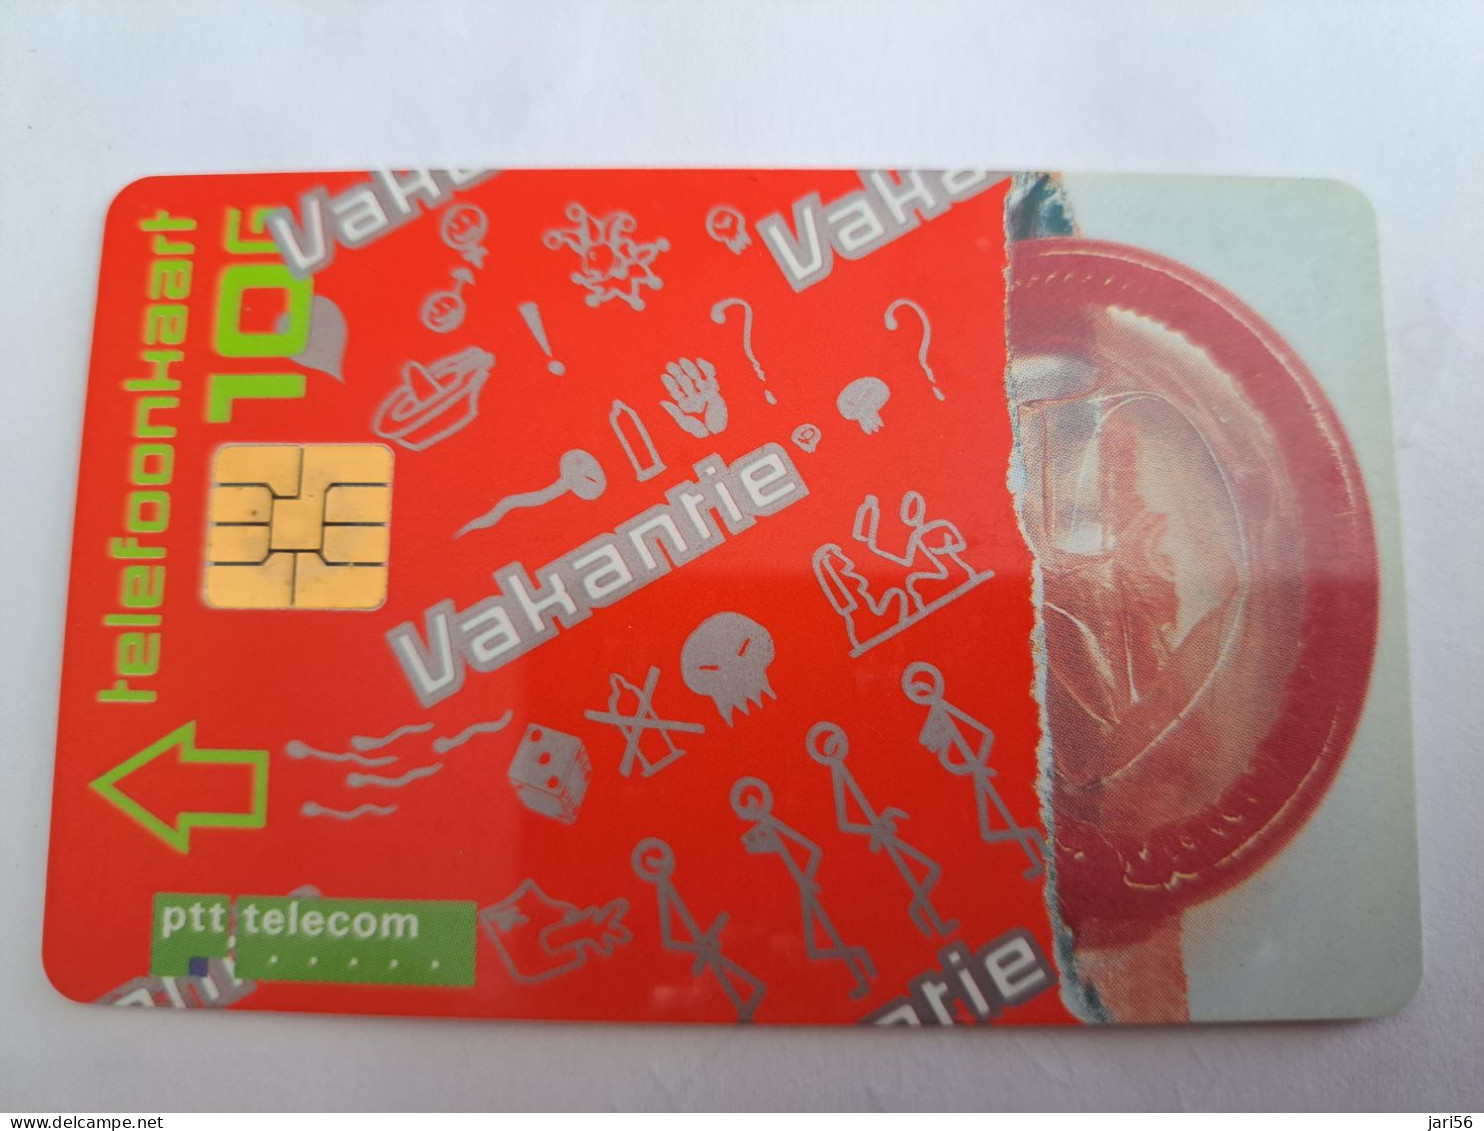 NETHERLANDS CHIPCARD / HFL 10 ,- HOLIDAY/ CONDOM/ SAFE SEX/     - USED CARD  ** 14009** - Publiques